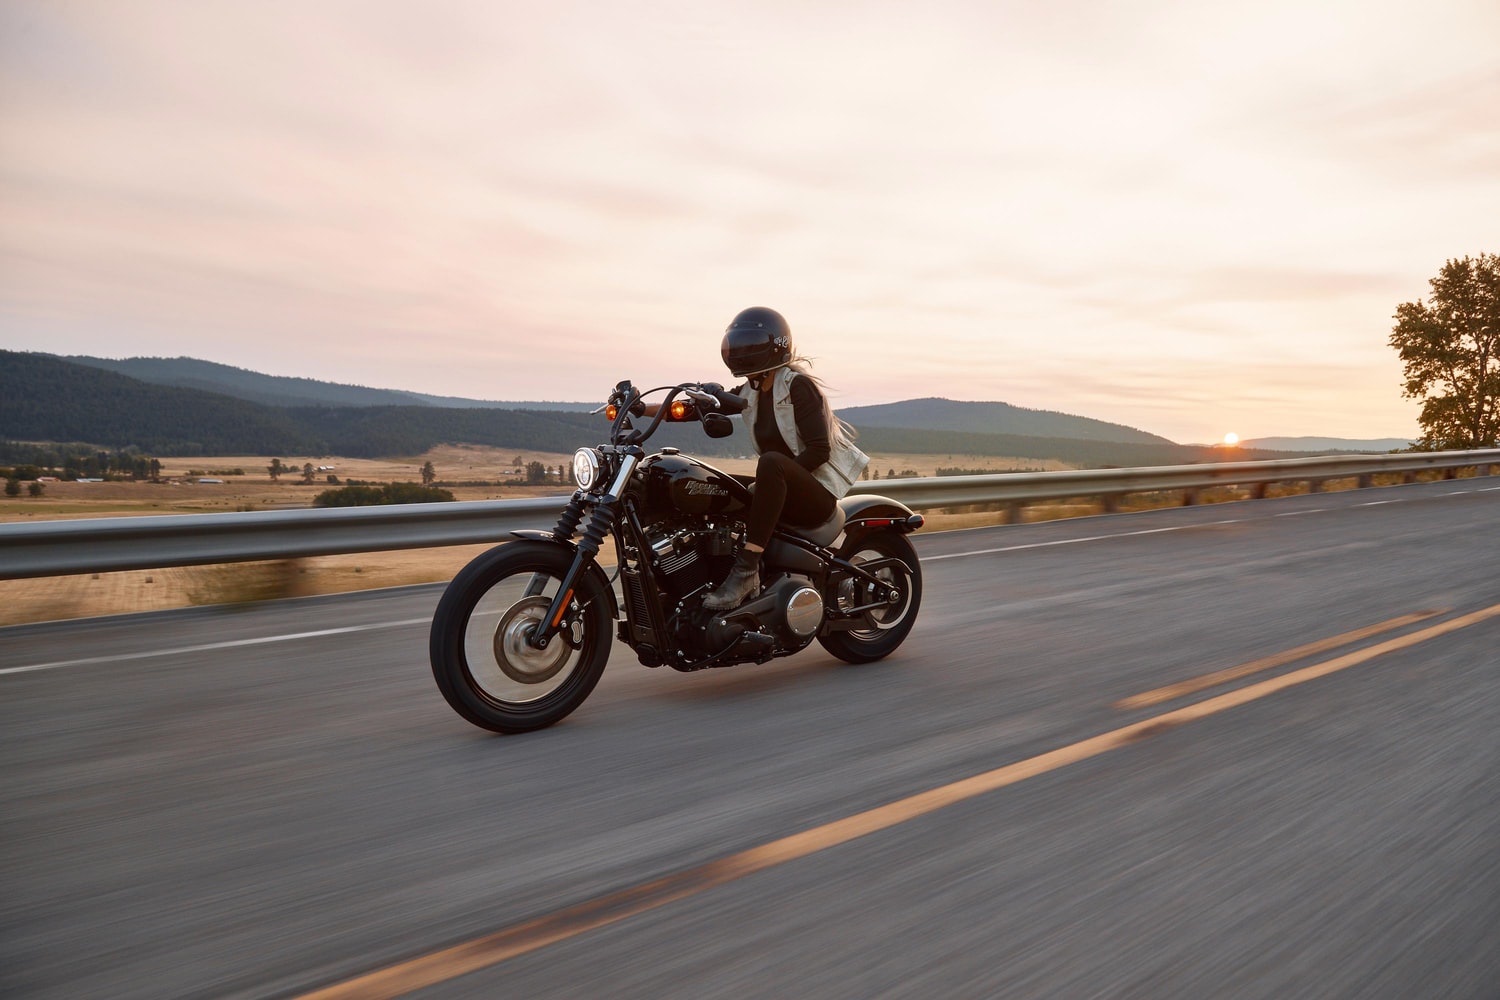 Motorcycle driving on highway with sun setting and mountains in the background